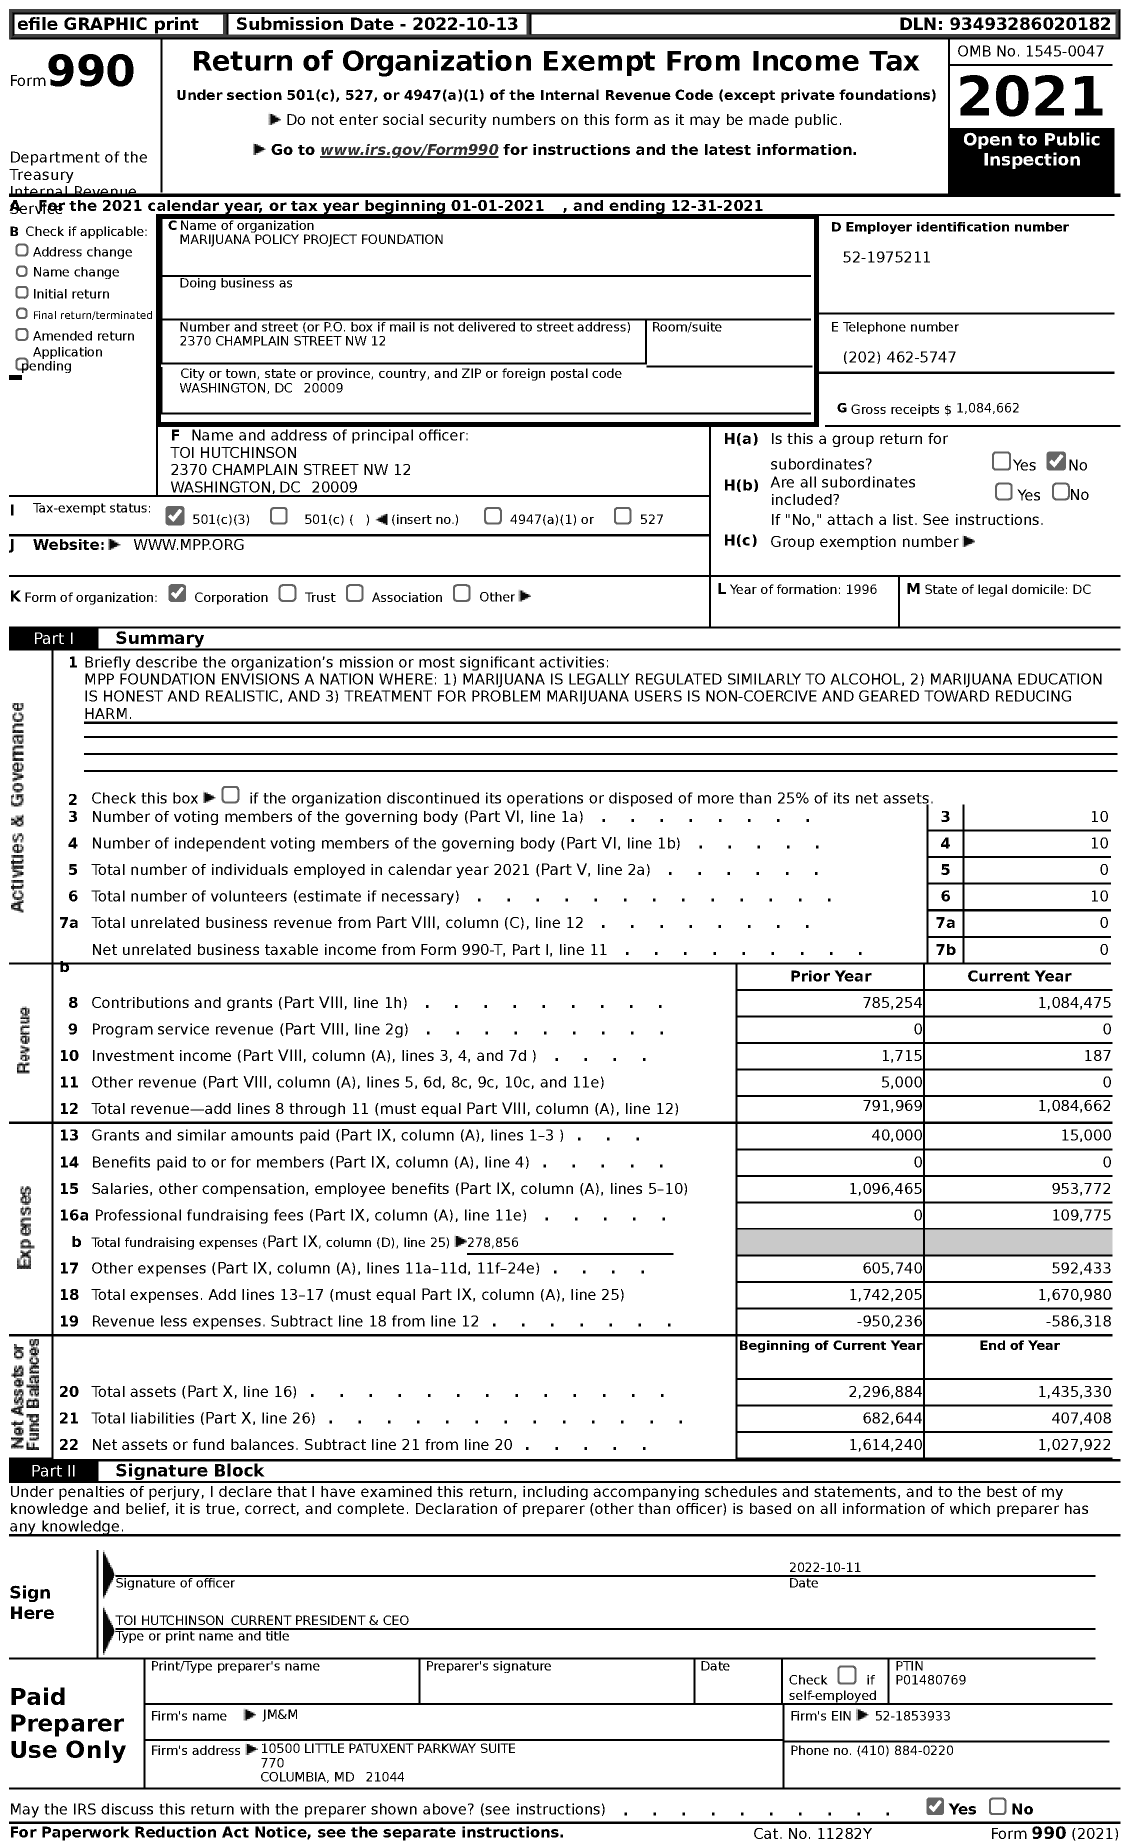 Image of first page of 2021 Form 990 for Marijuana Policy Project (MPP)